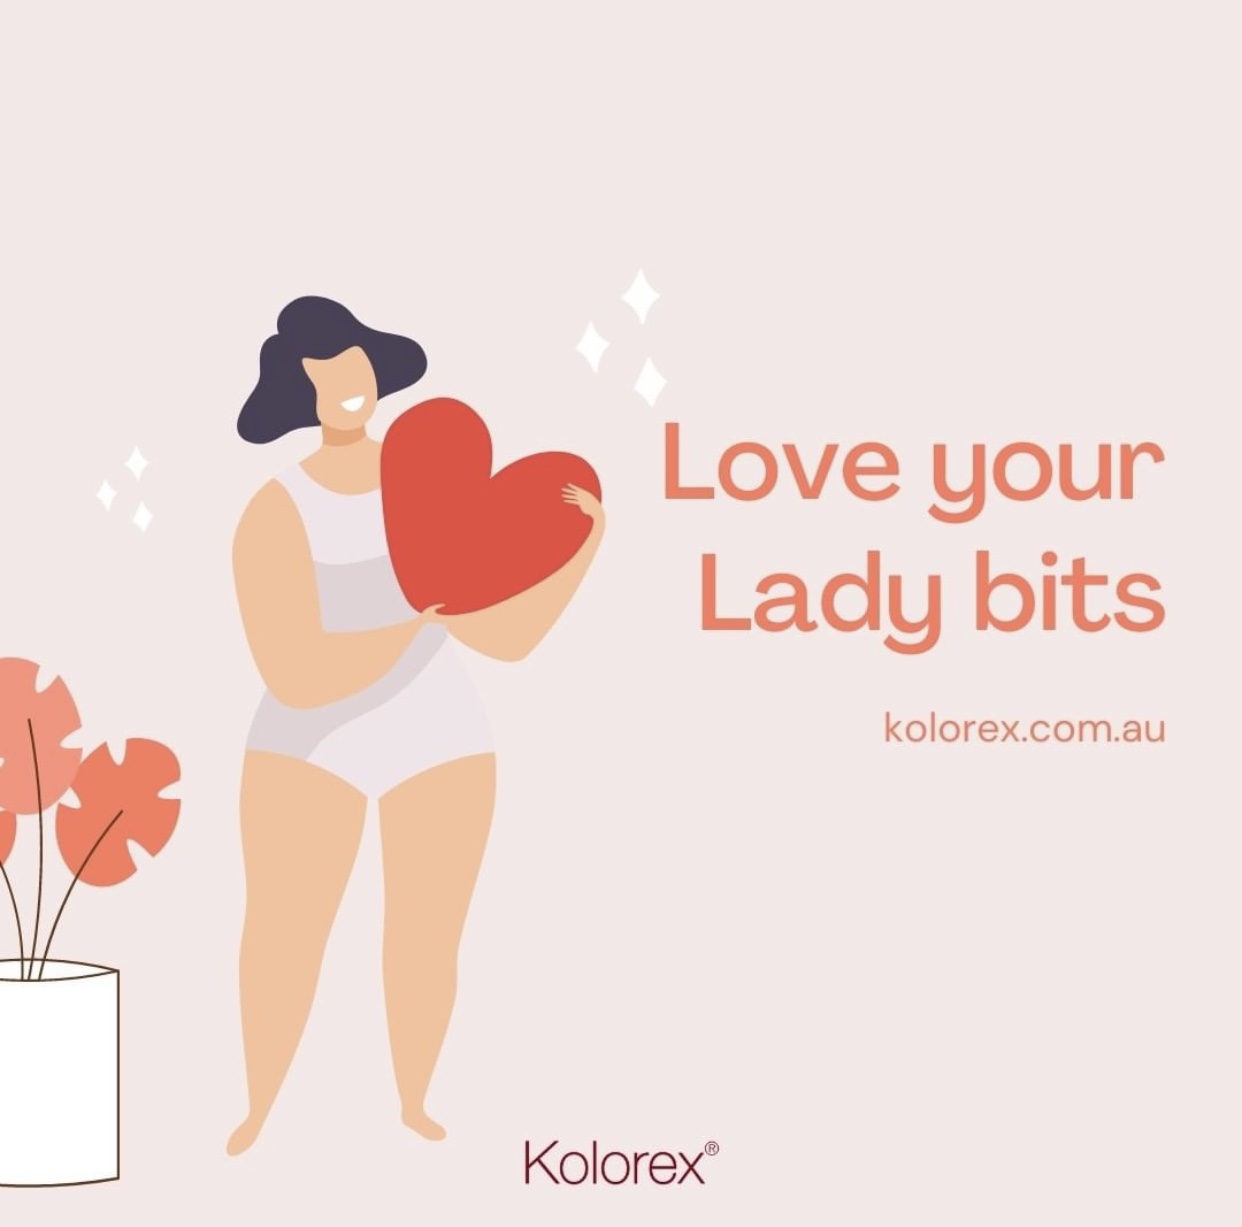 Join the movement to #LoveYourLadyBits! 